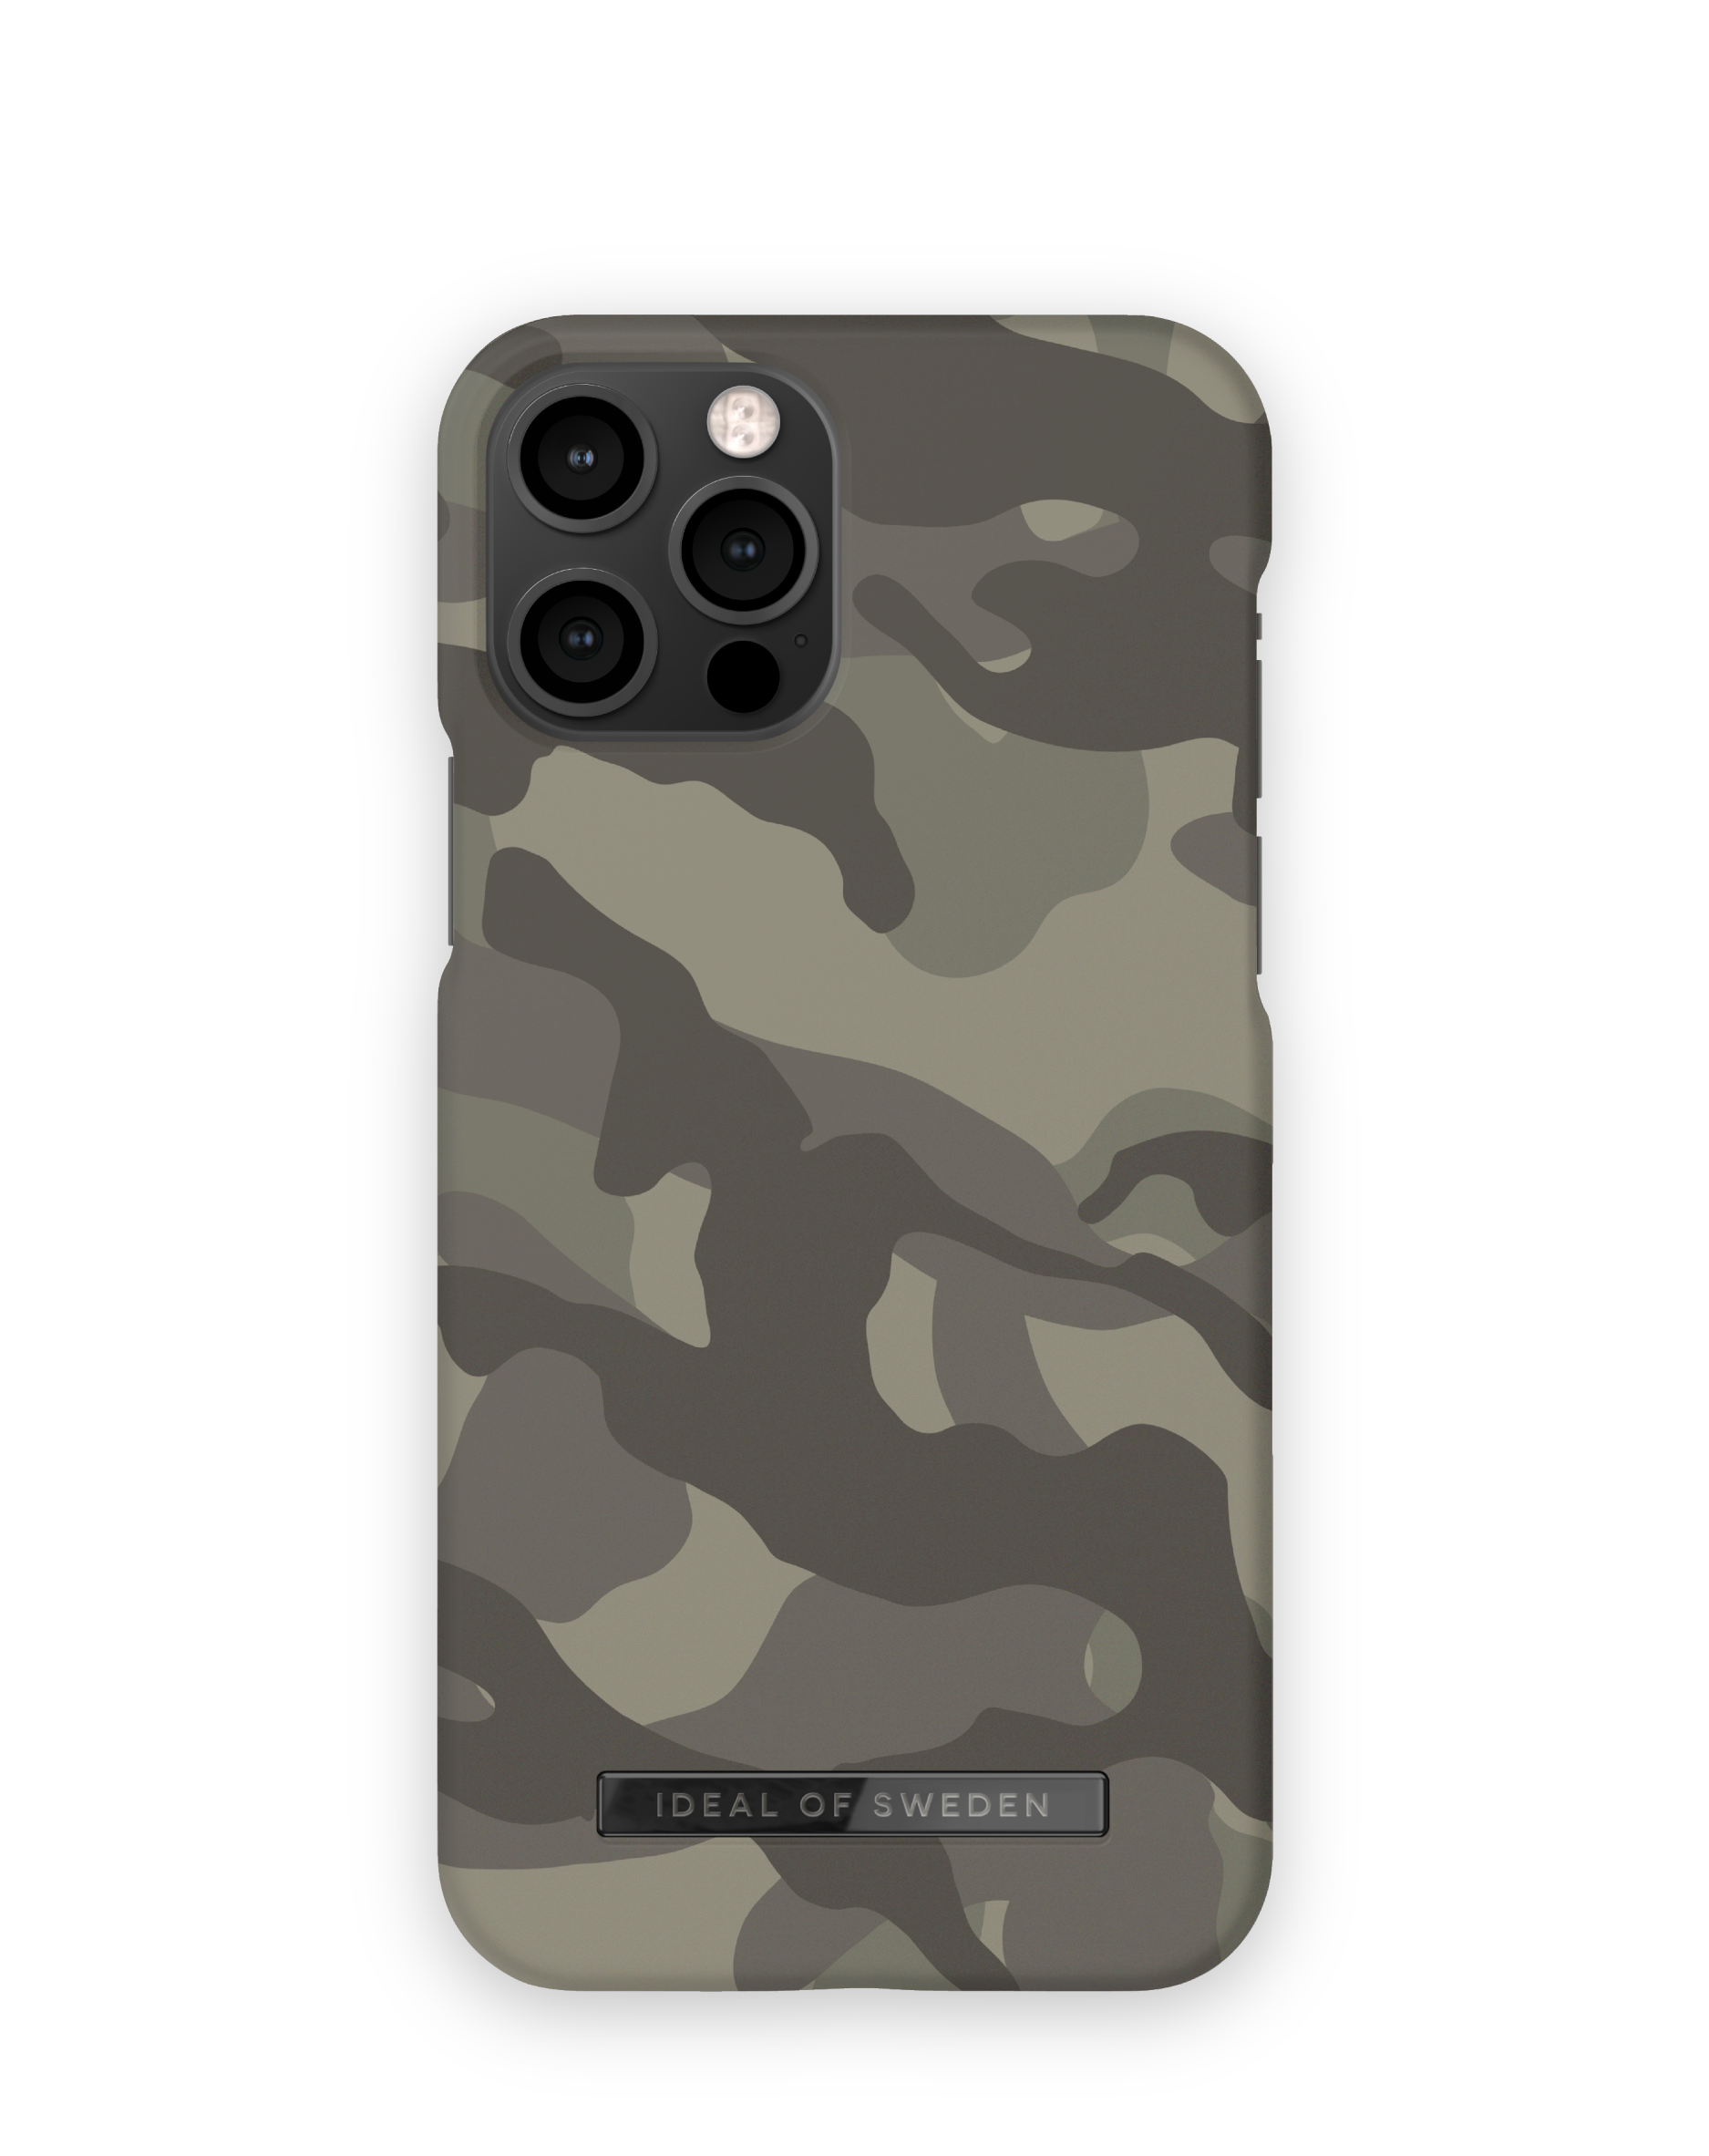 12/12 Pro, Apple, OF IDEAL Matte IDFCAW21-I2061-359, iPhone Camo Backcover, SWEDEN